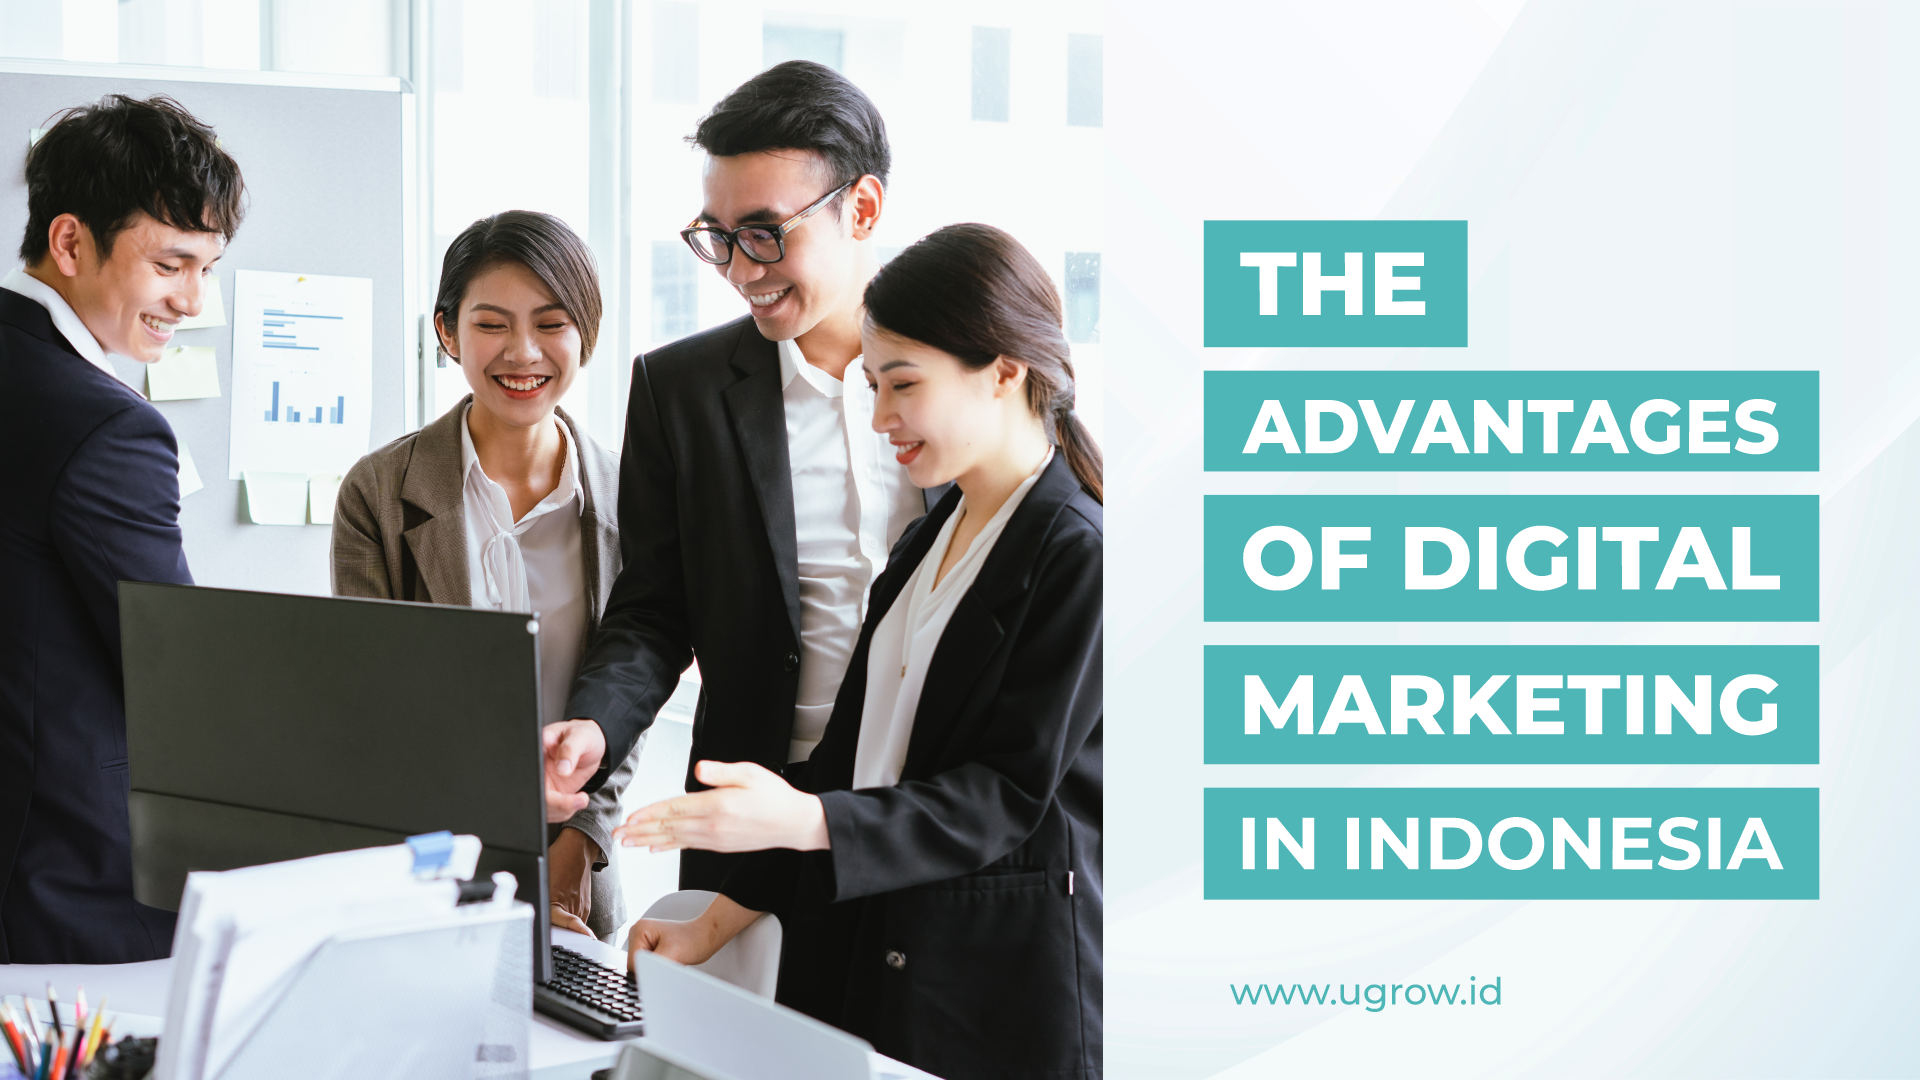 The Advantages of Digital Marketing in Indonesia